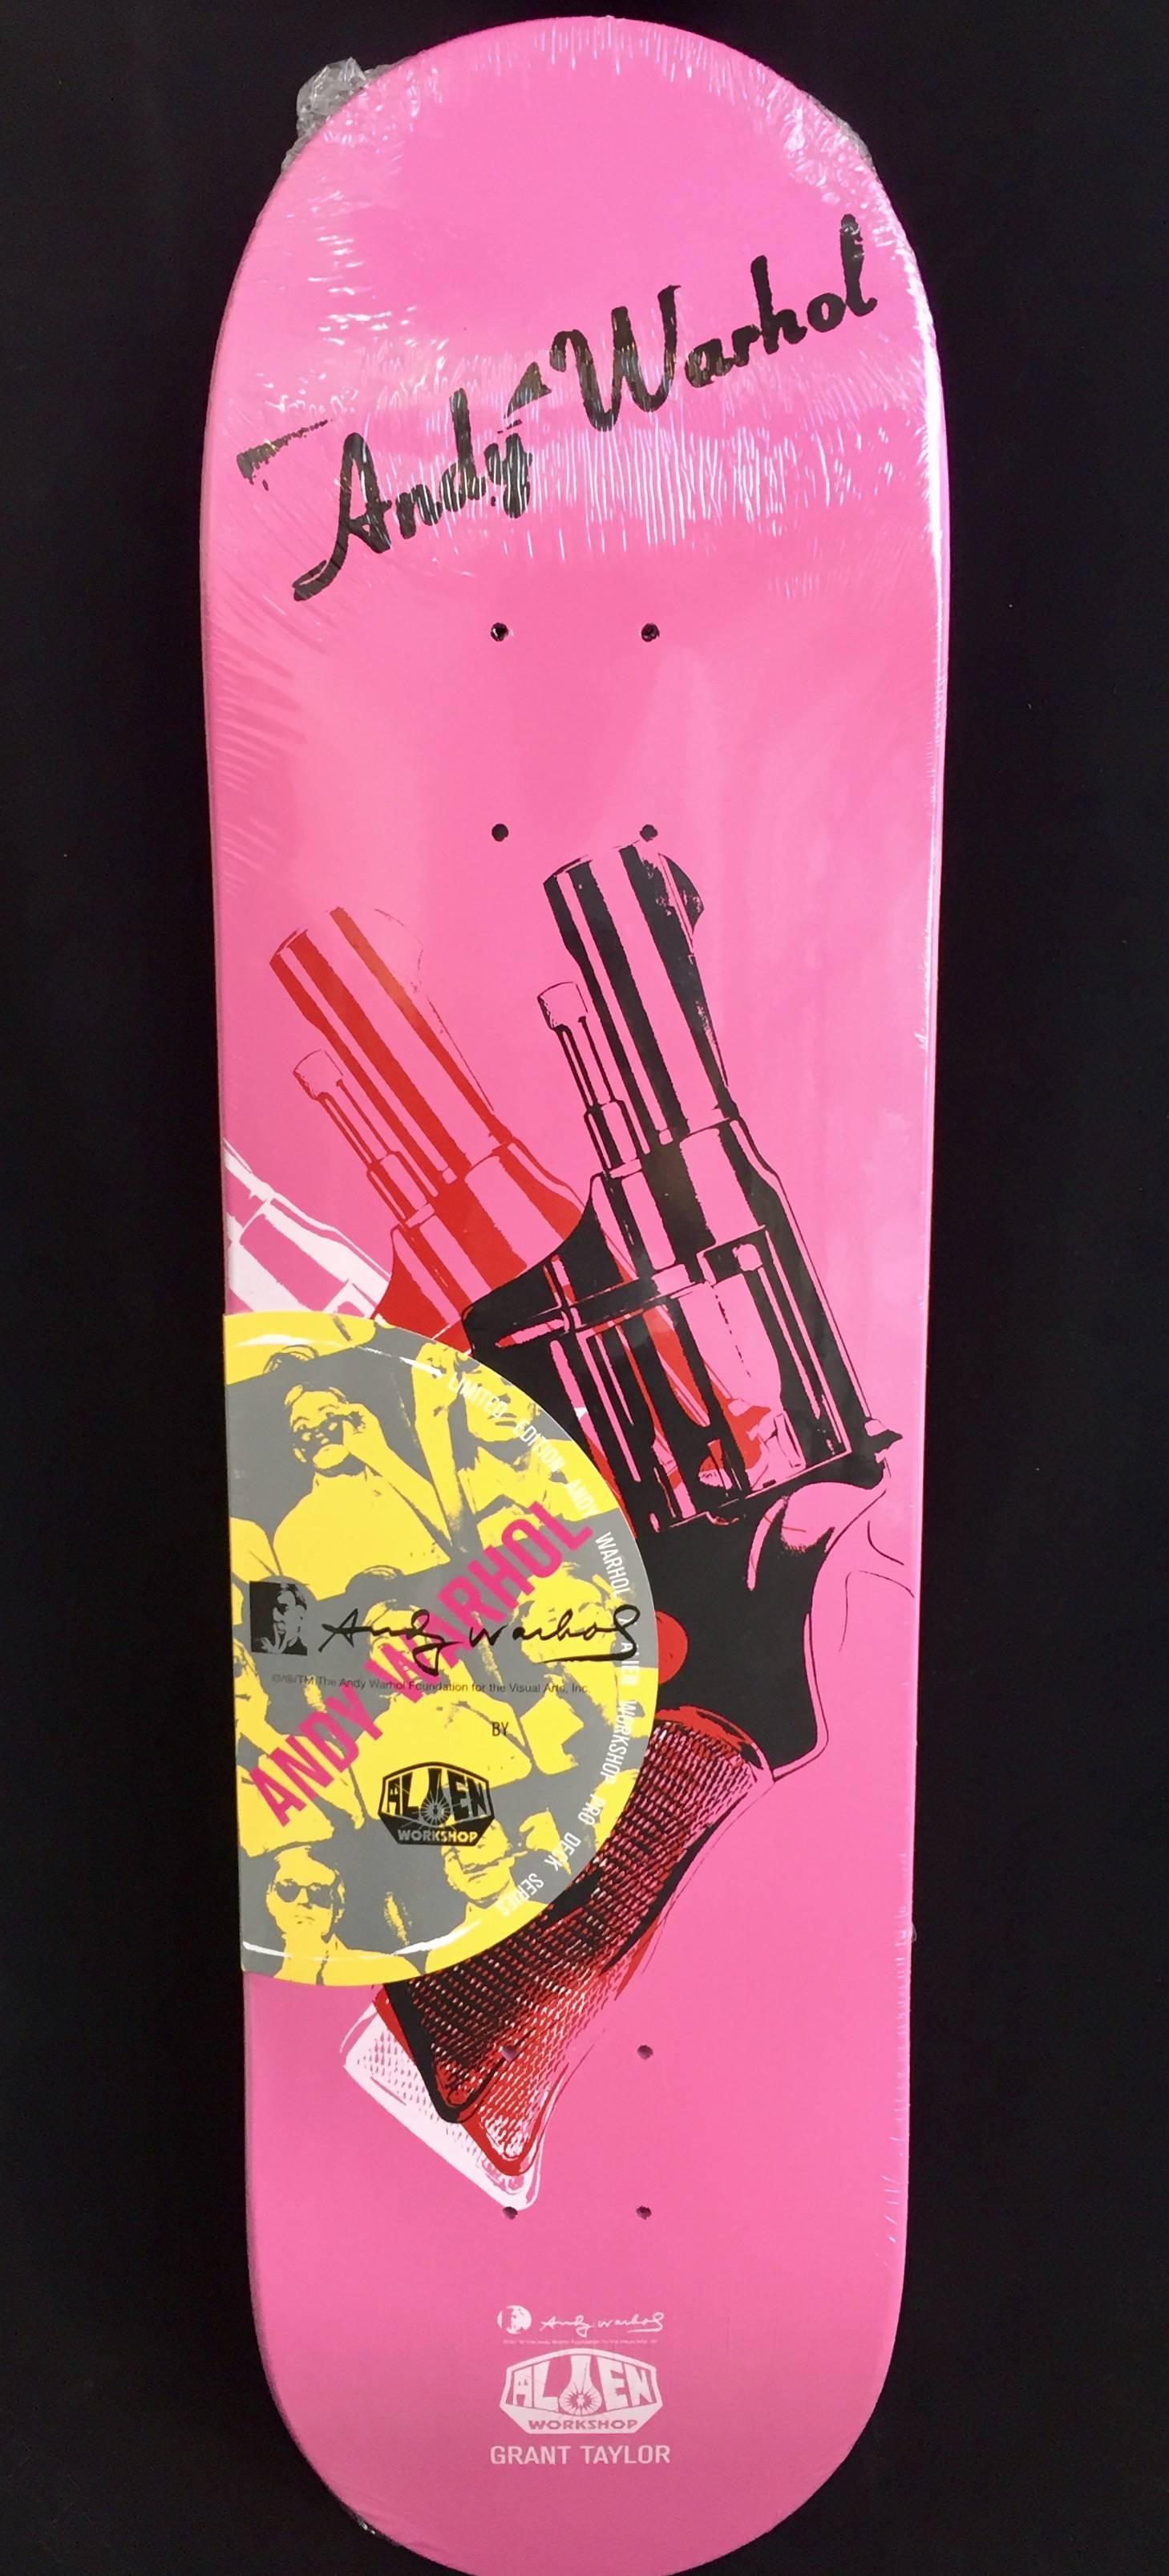 Andy Warhol Gun Skateboard Deck (Warhol Death and Disaster) - Art by (after) Andy Warhol